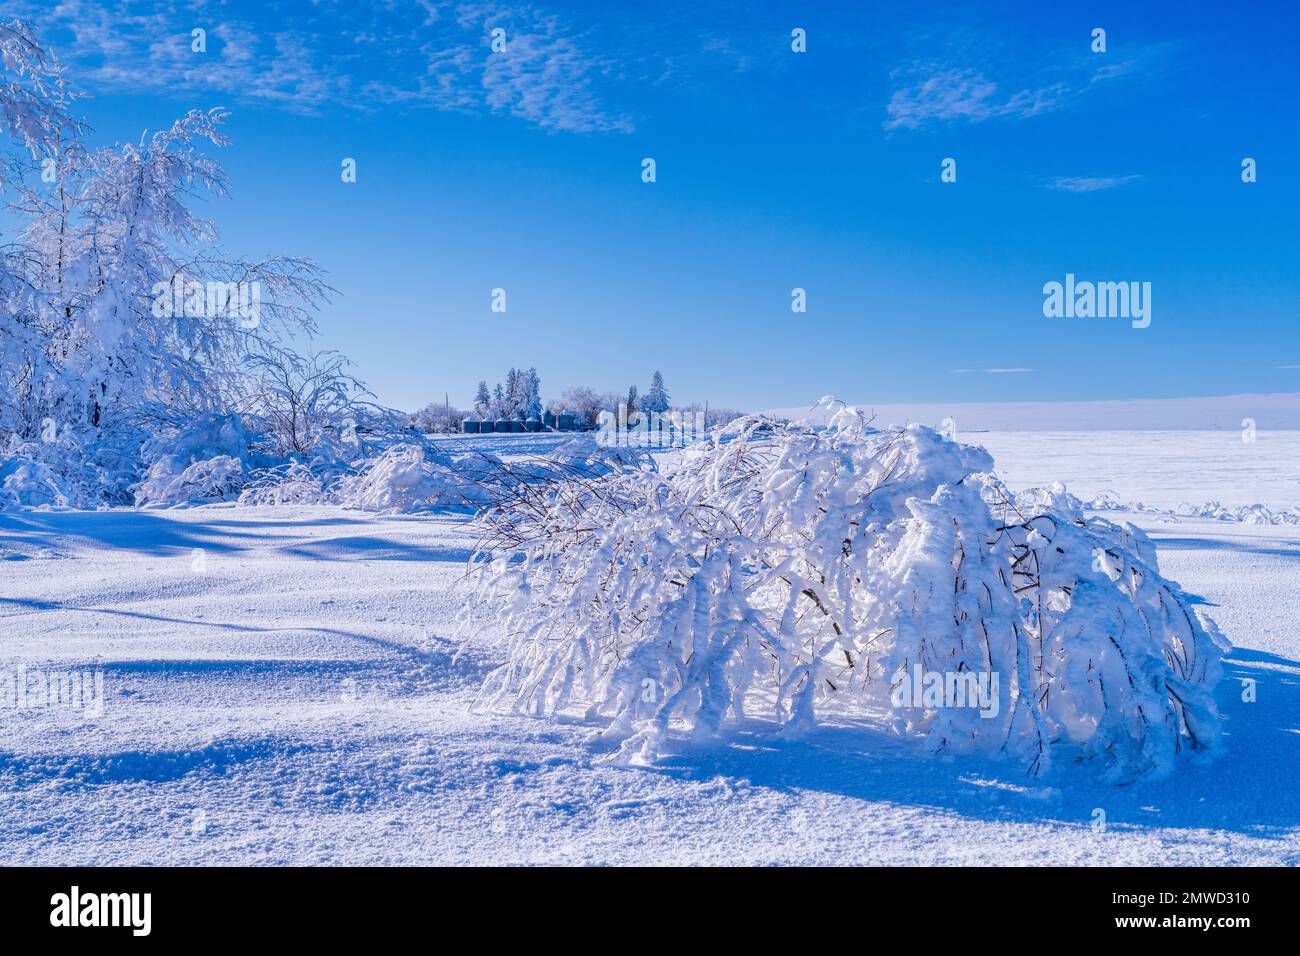 Trees covered in winter hoar frost near the village of St. Leon, Manitoba, Canada. Stock Photo